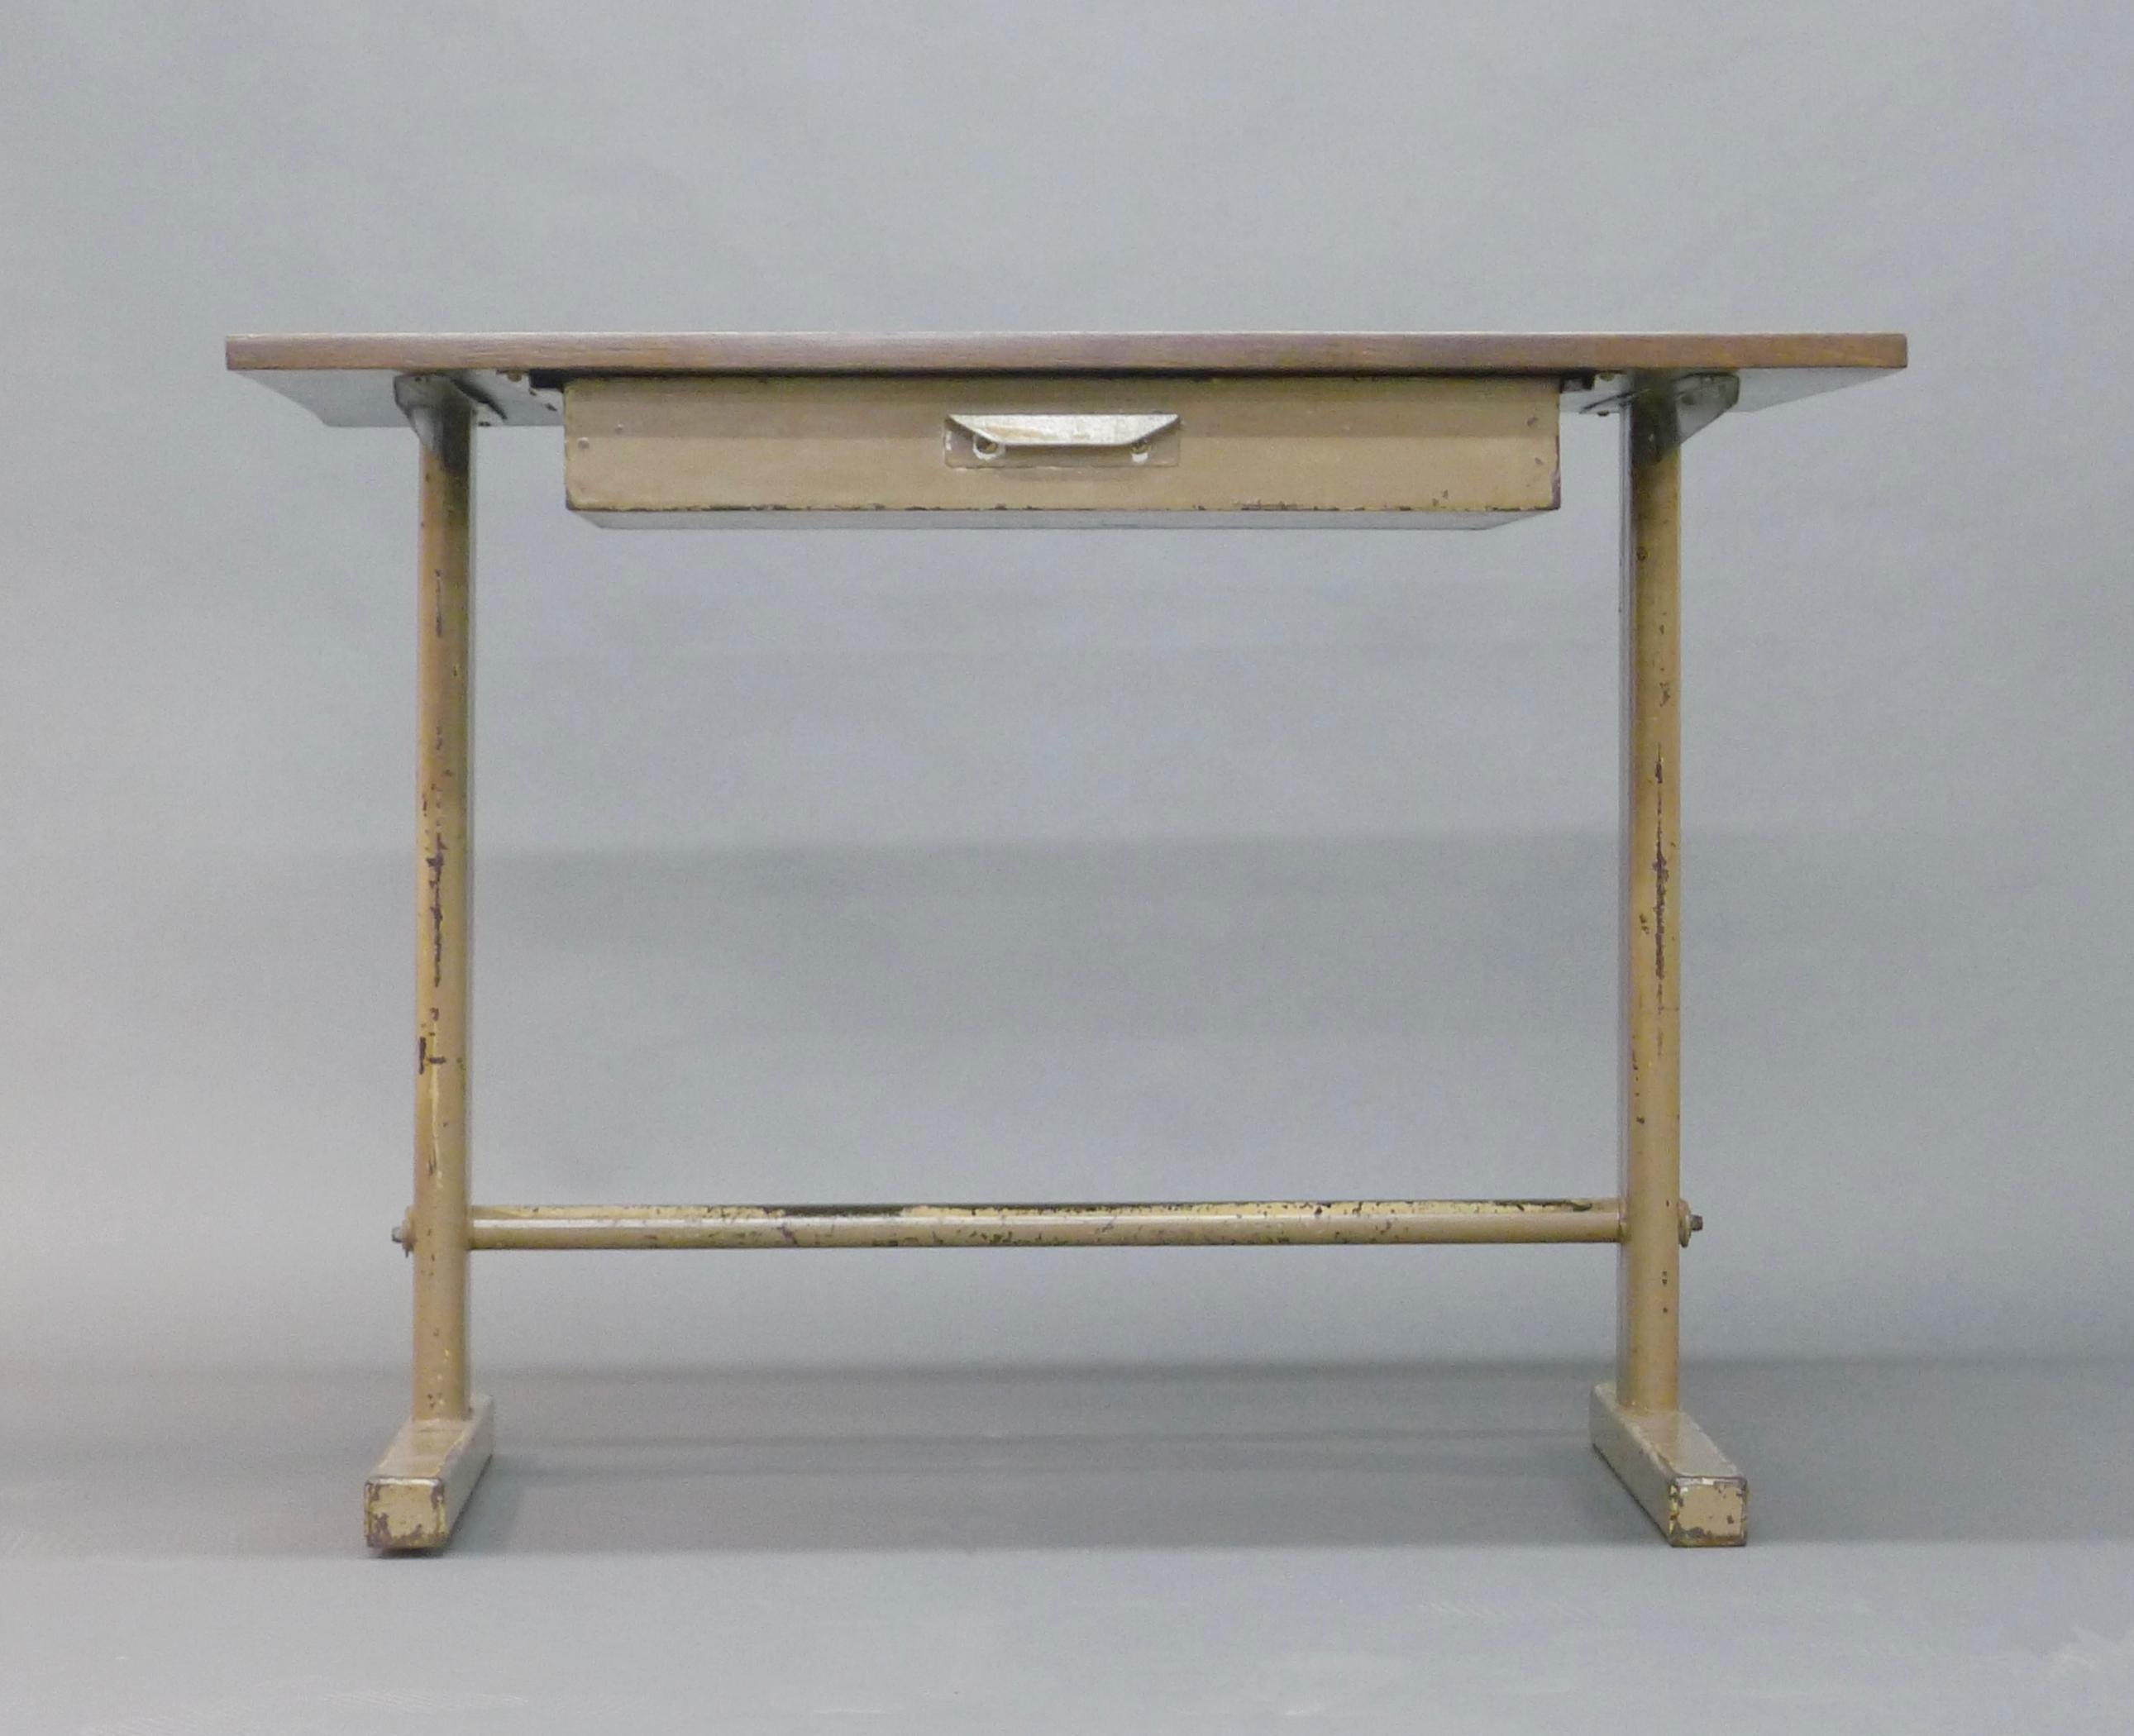 Cité desk with drawer, designed by Jean Prouvé and made in his workshop, Ateliers Jean Prouvé in Nancy, France, probably 1940s

Totally original with cream enamel painted metal frame and oak top, fitted a single drawer to front.

74cm high, 100cm